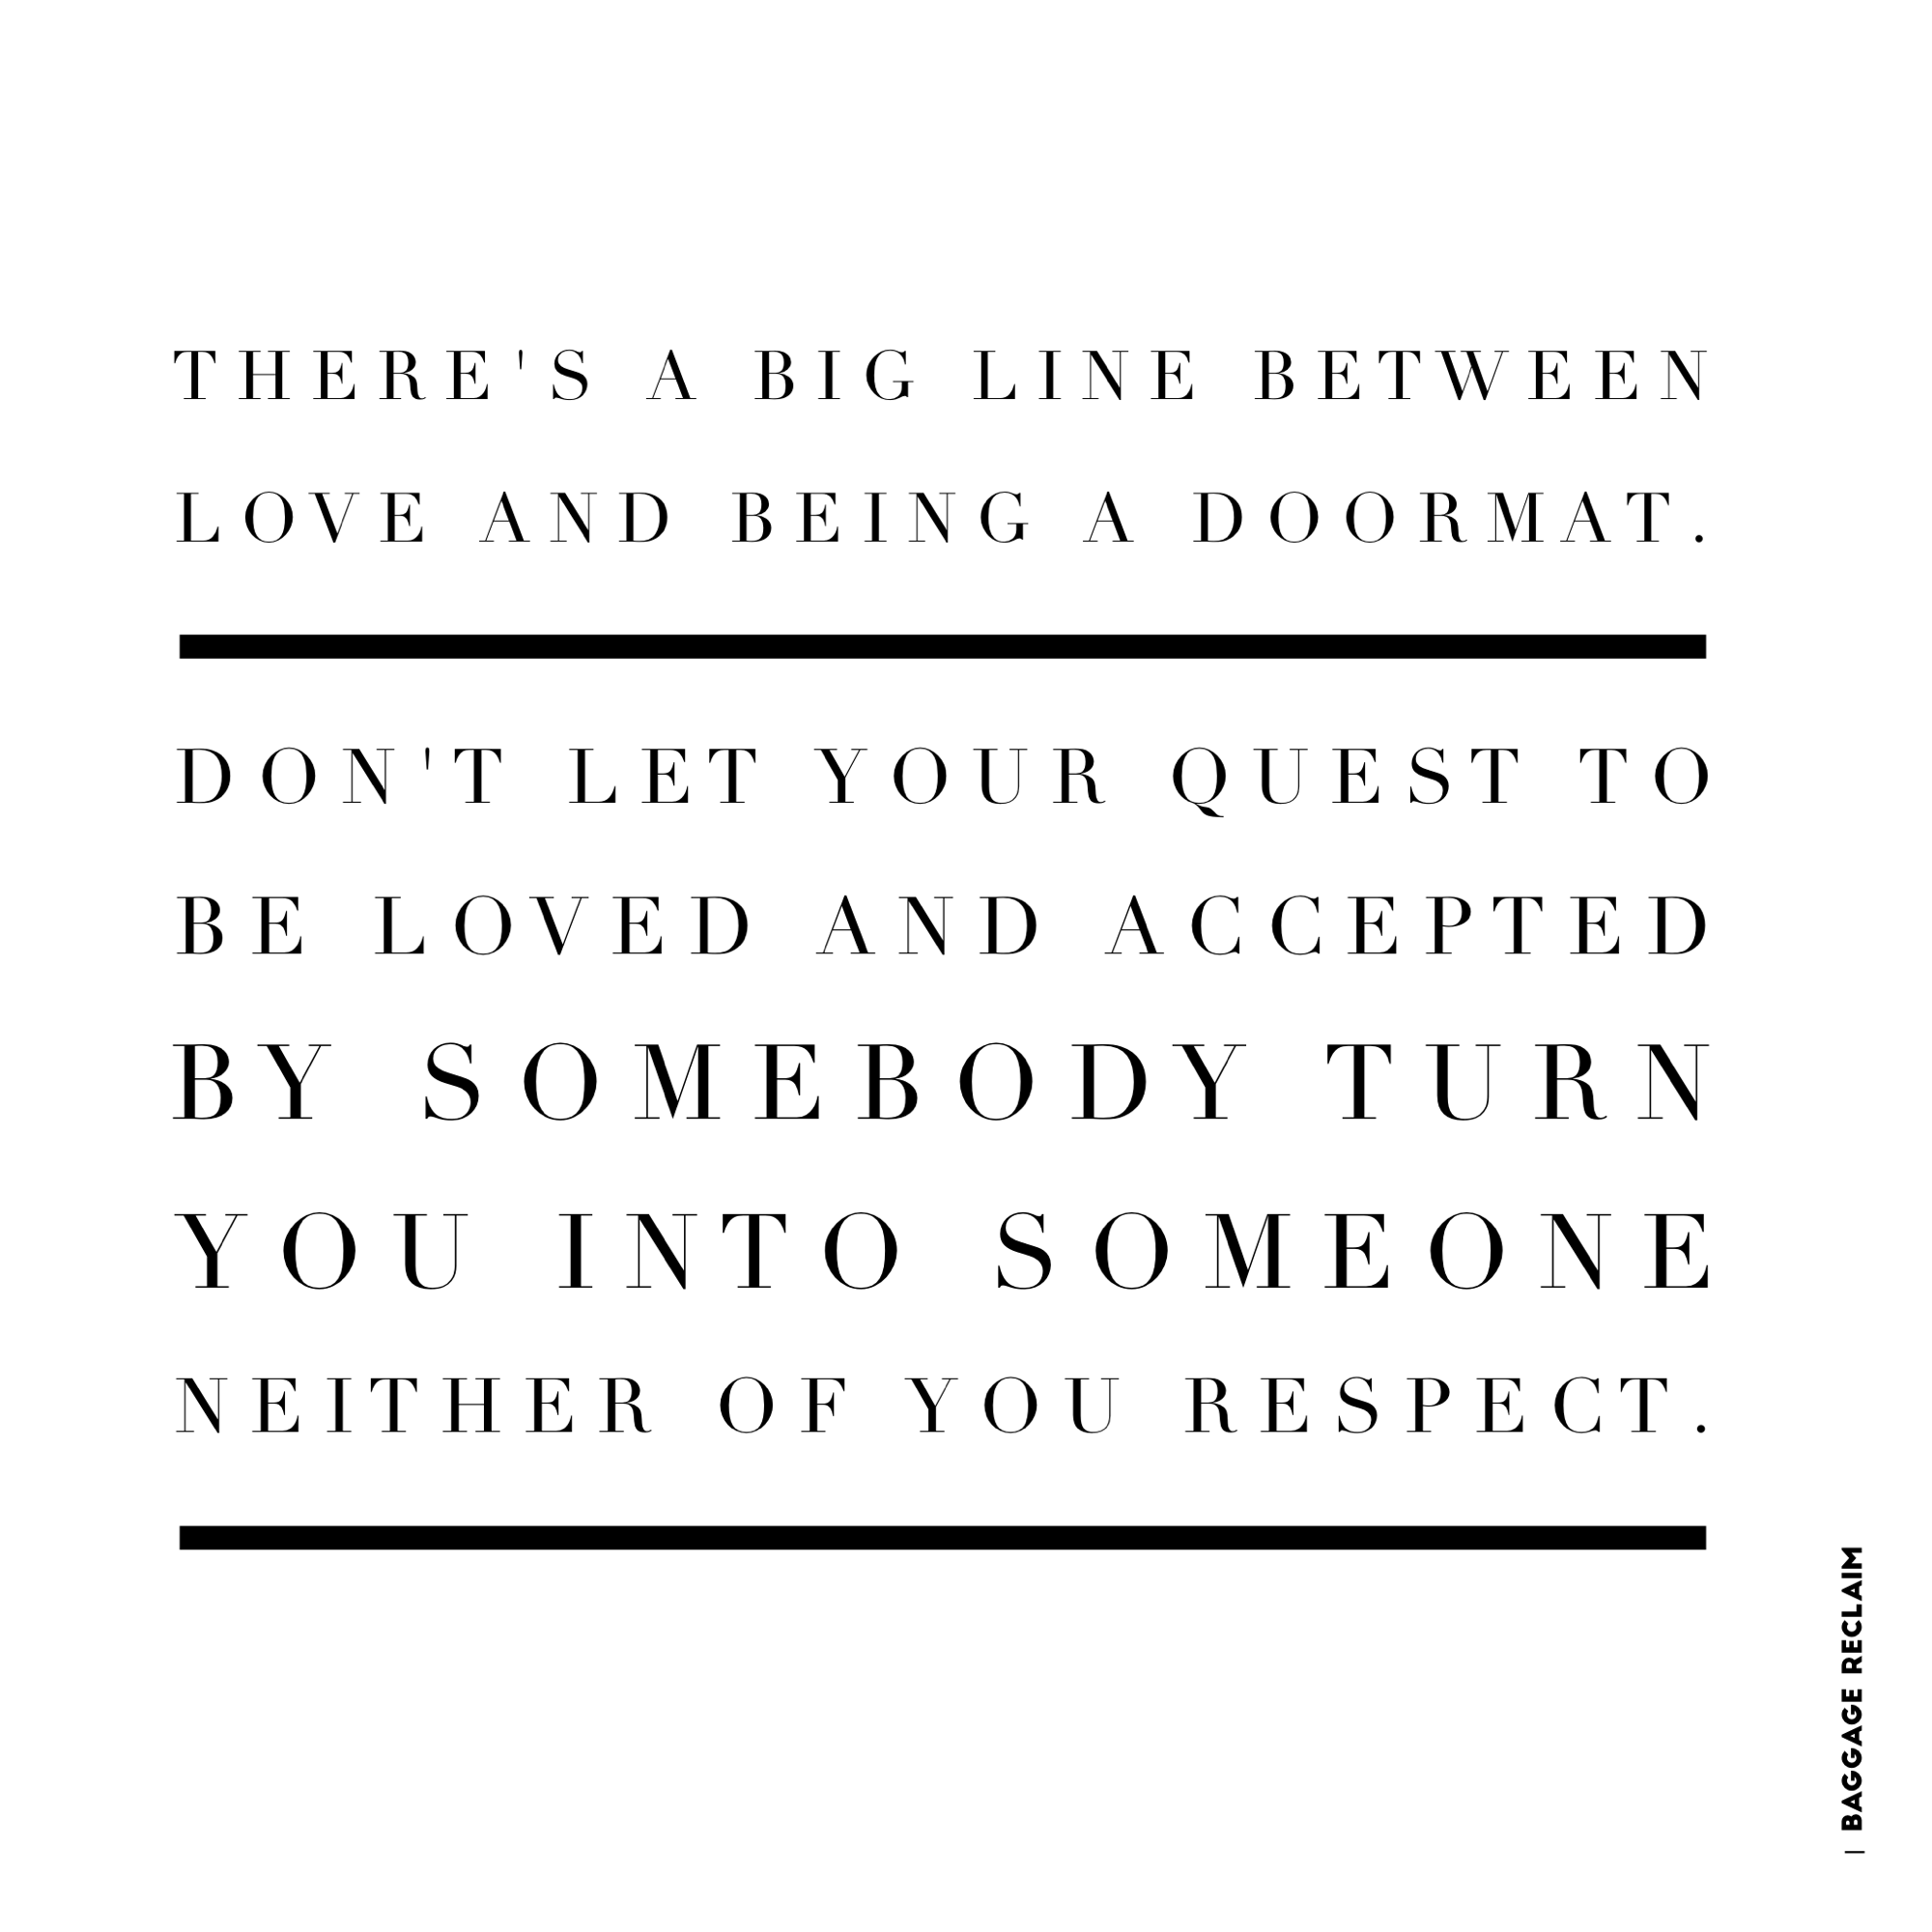 There's a big line between love and being a doormat. Don't let your quest to be loved and accepted by somebody turn you into someone neither of you respect